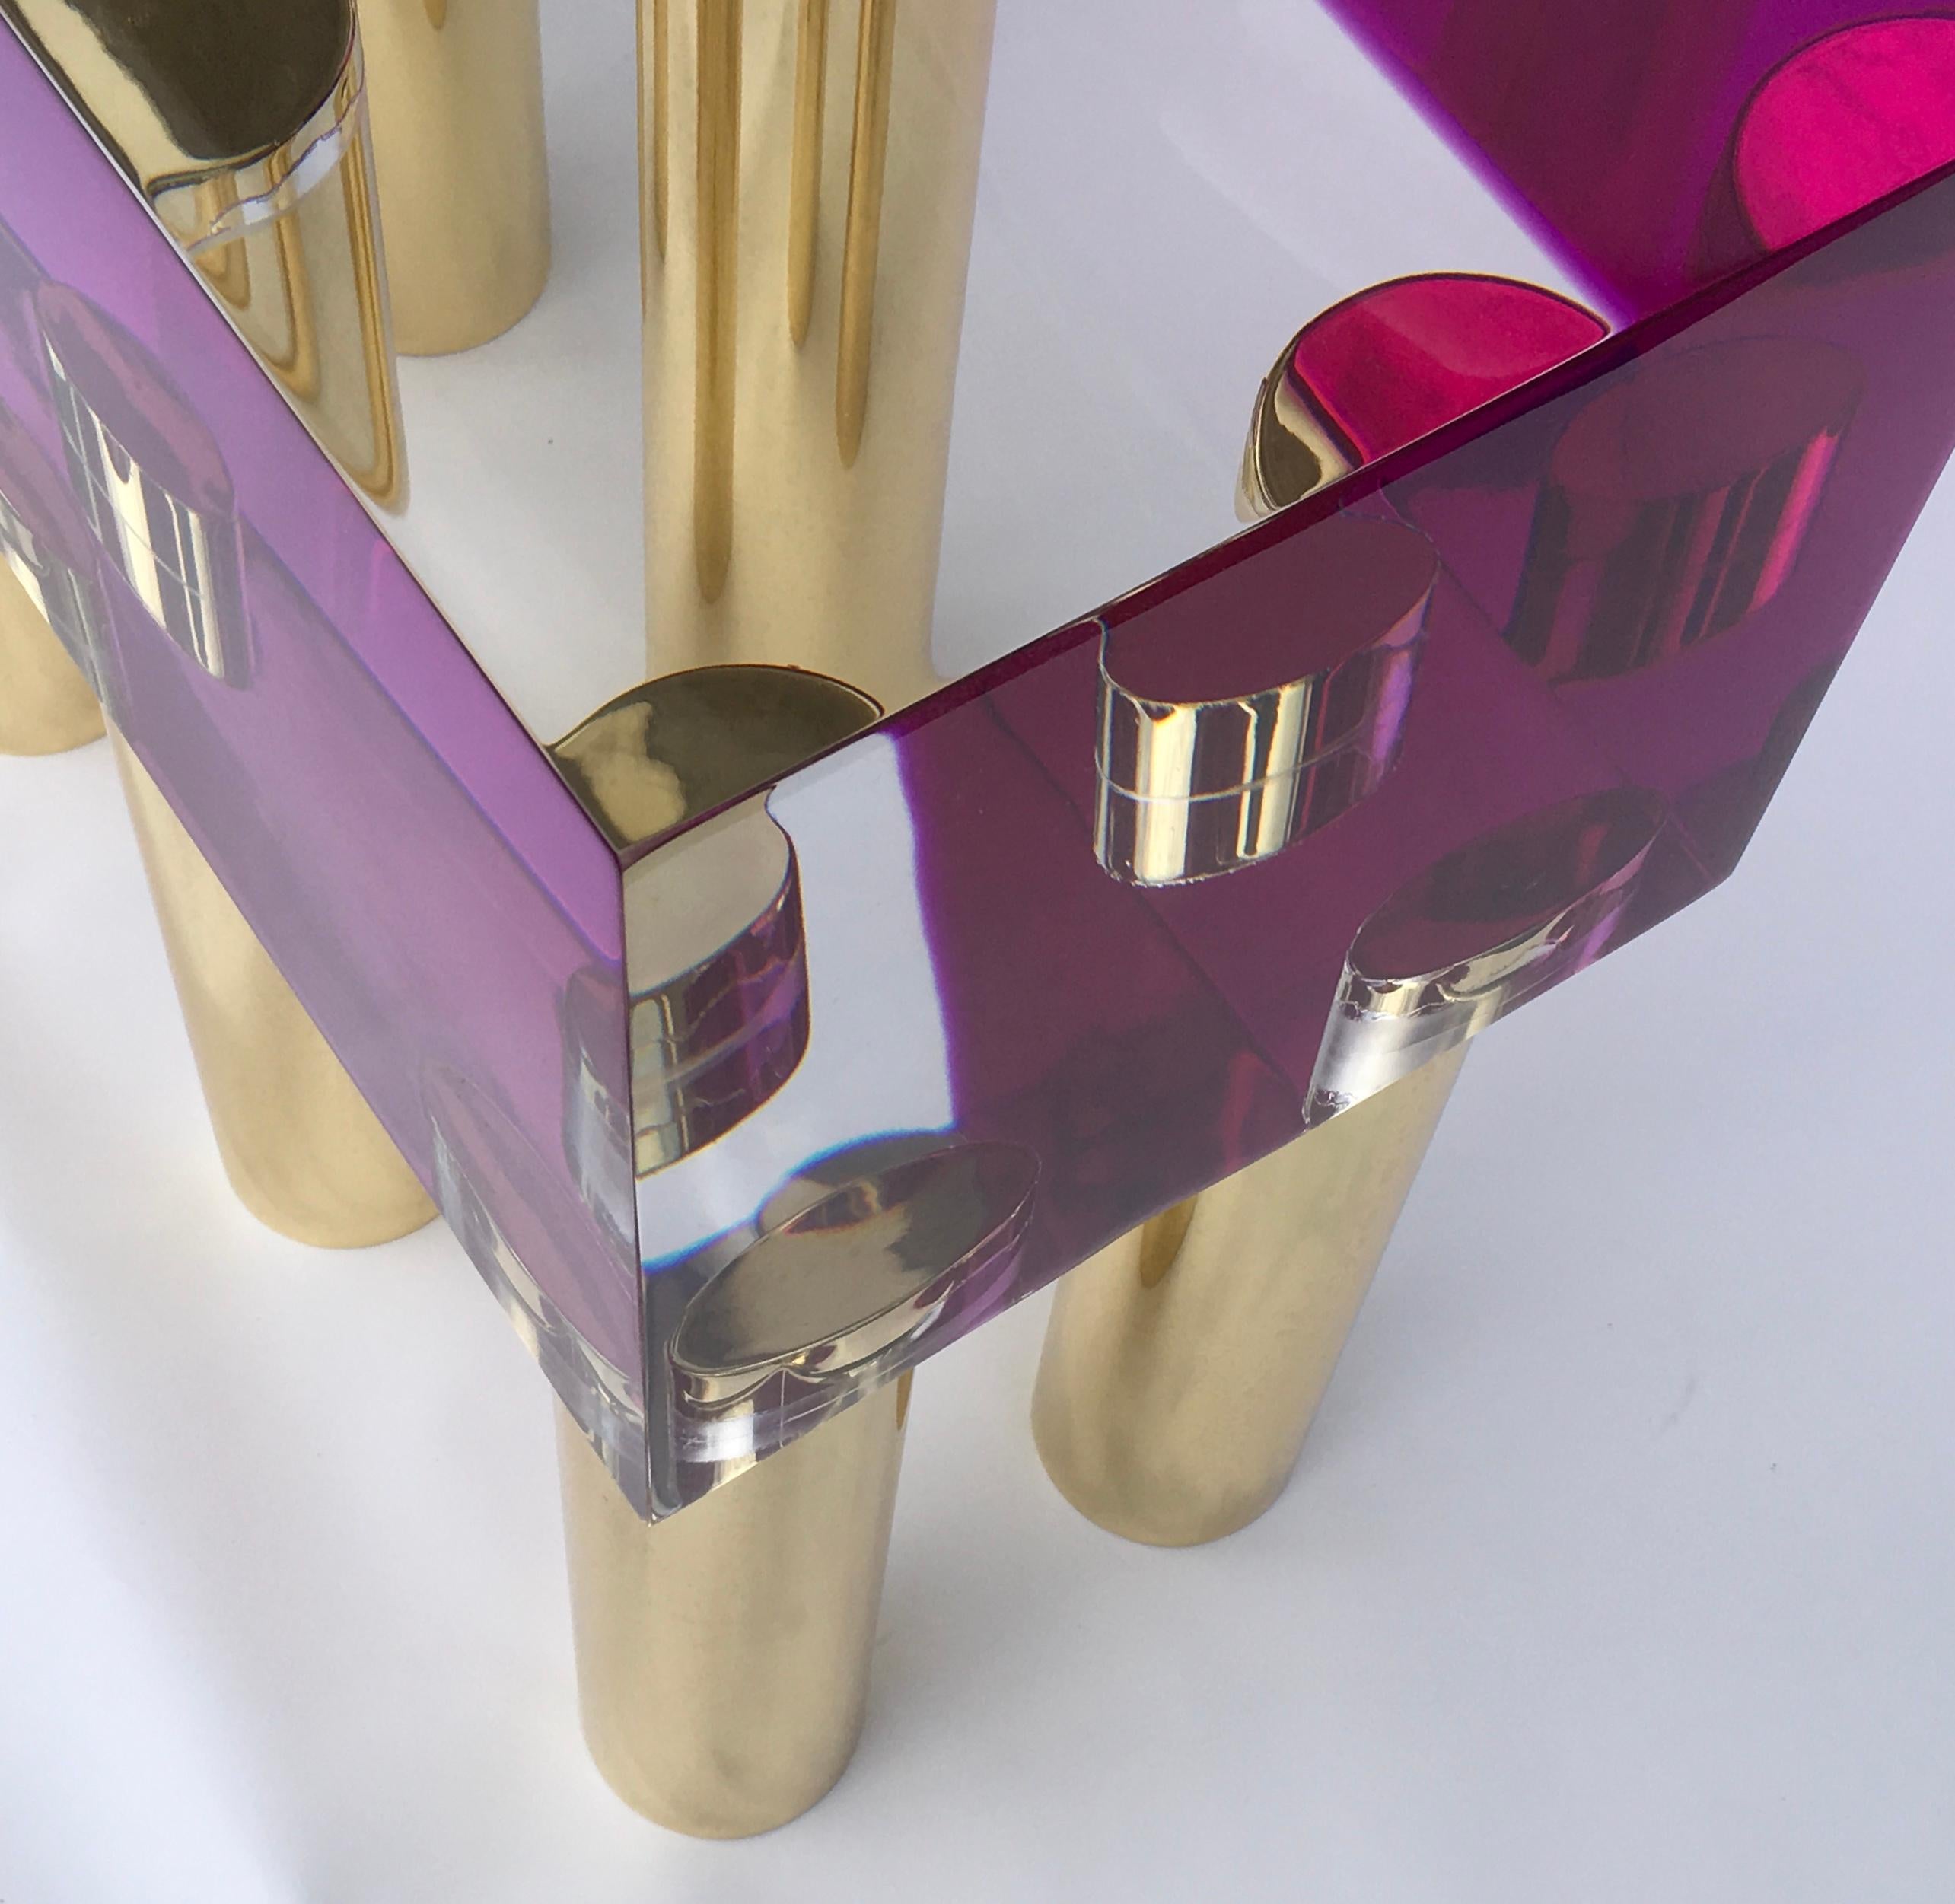 A beautiful bench or coffee table in transparent plexiglass with color pink and with ten brass legs designed by Studio Superego for Superego Editions in 2018.

Biography:
Superego Editions was born in 2006, performing a constant activity of research